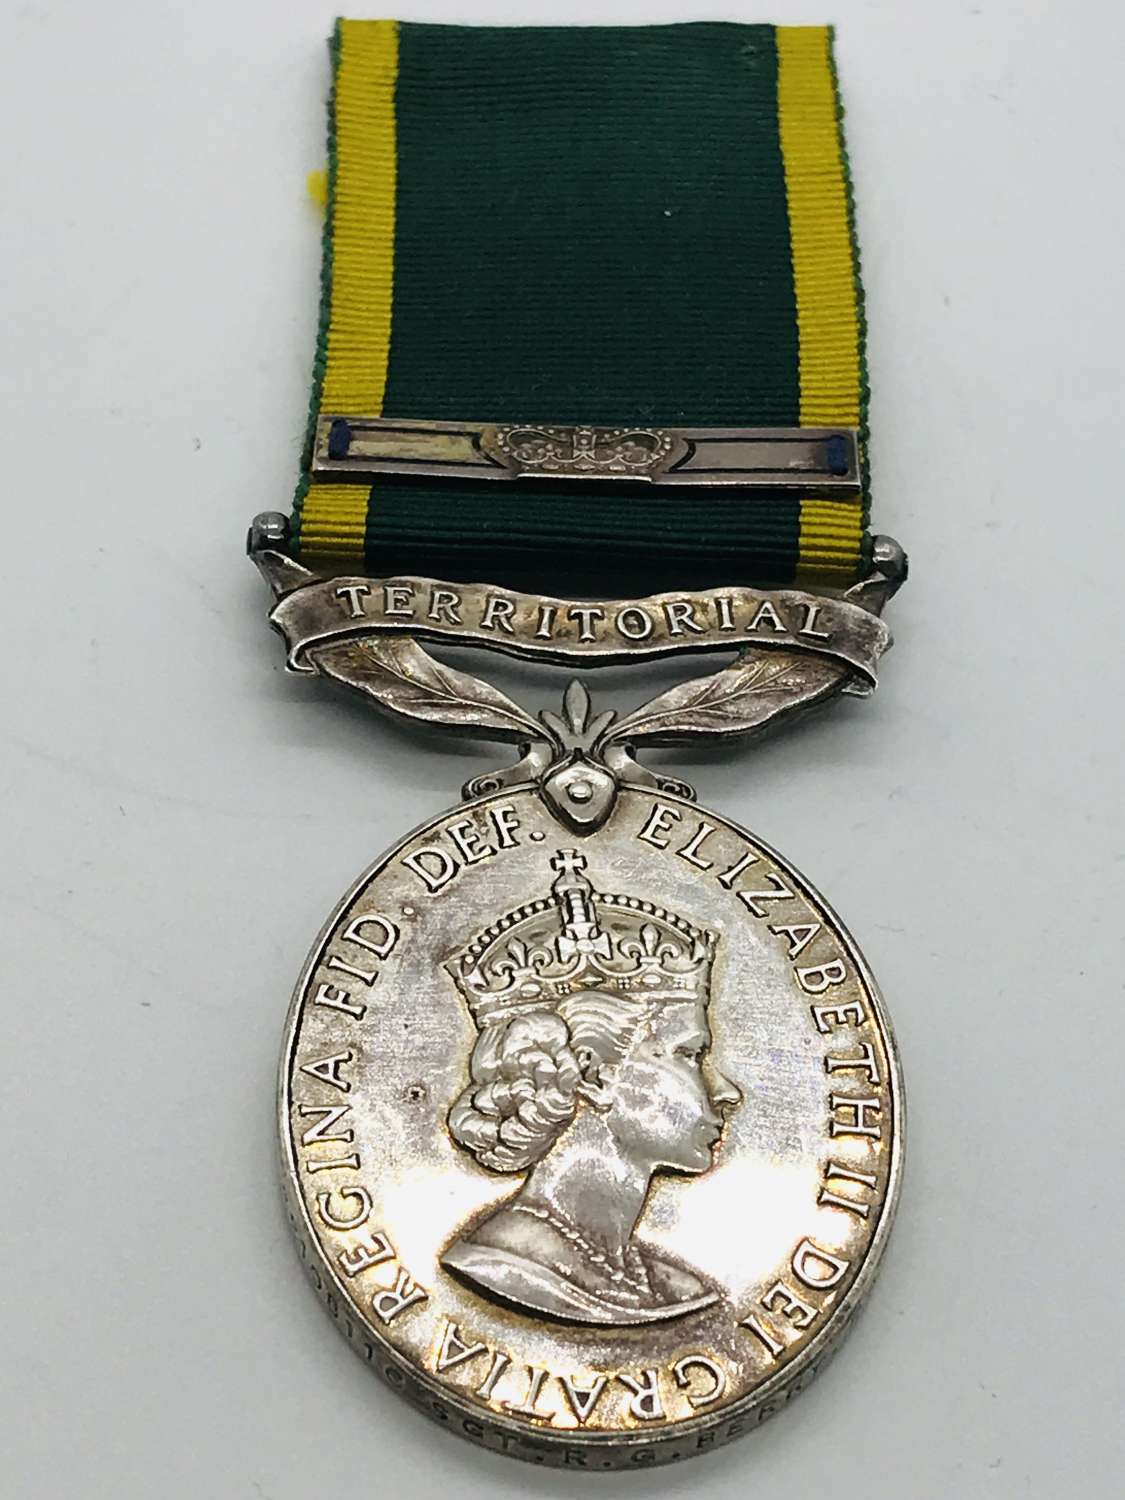 Queens territorial efficiency medal and bar